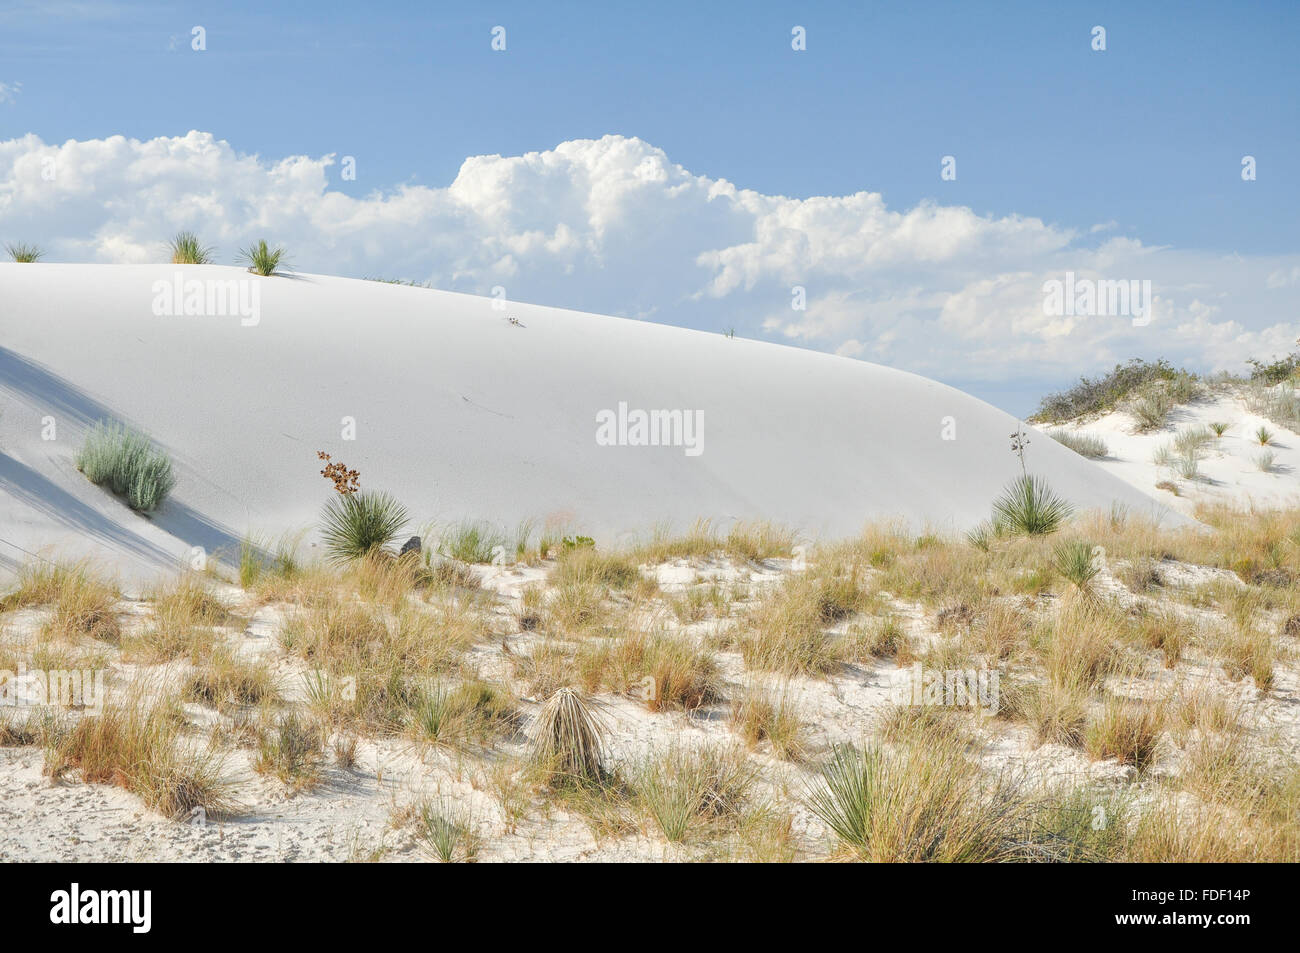 A sand dune in White Sands National Monument Stock Photo